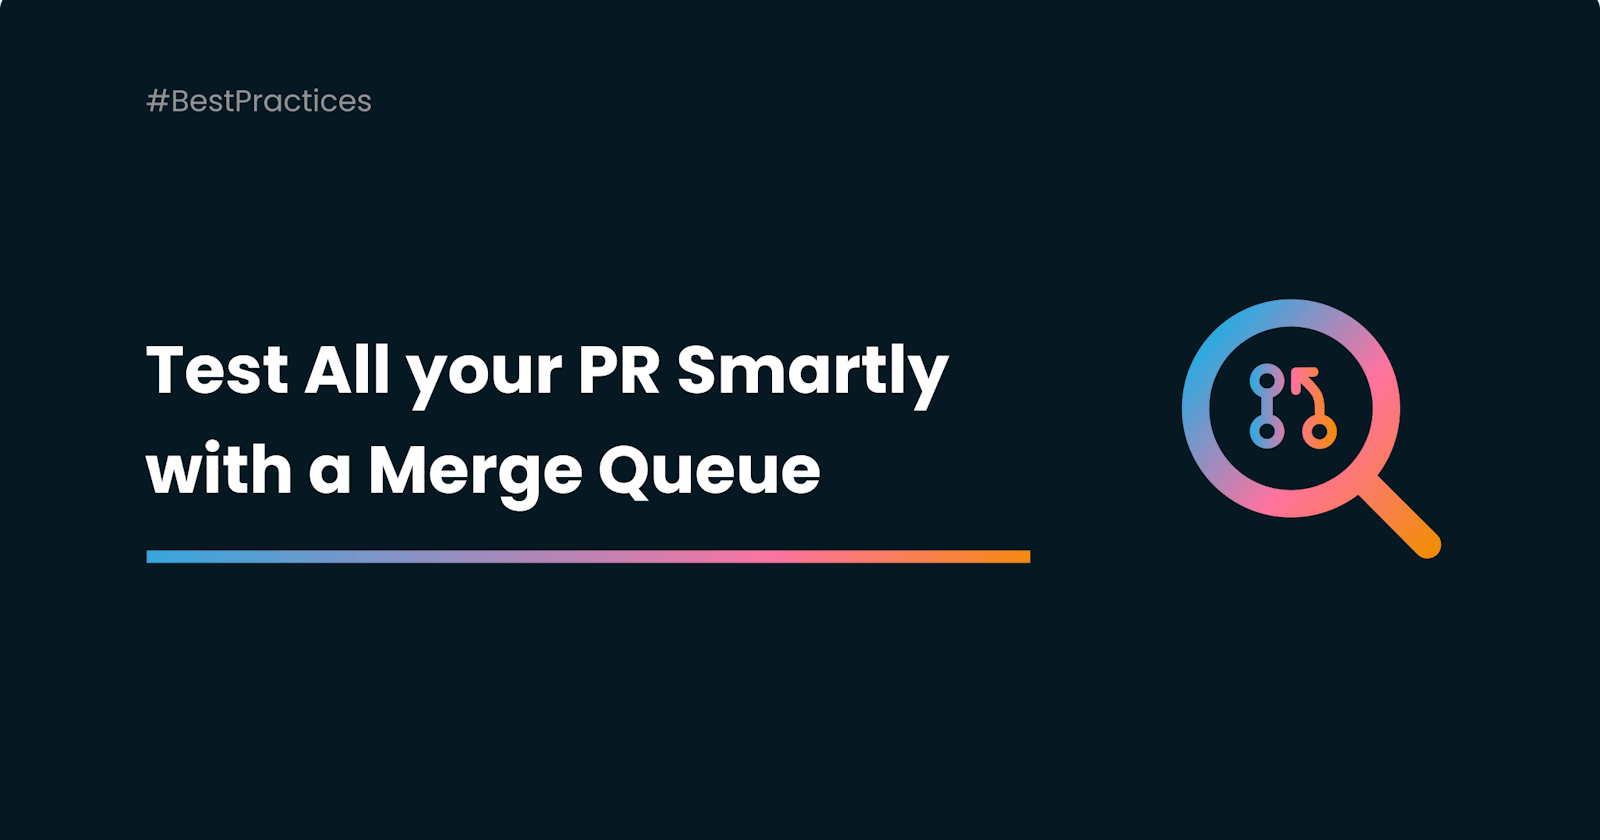 Testing your Pull Requests Smartly with a Merge Queue